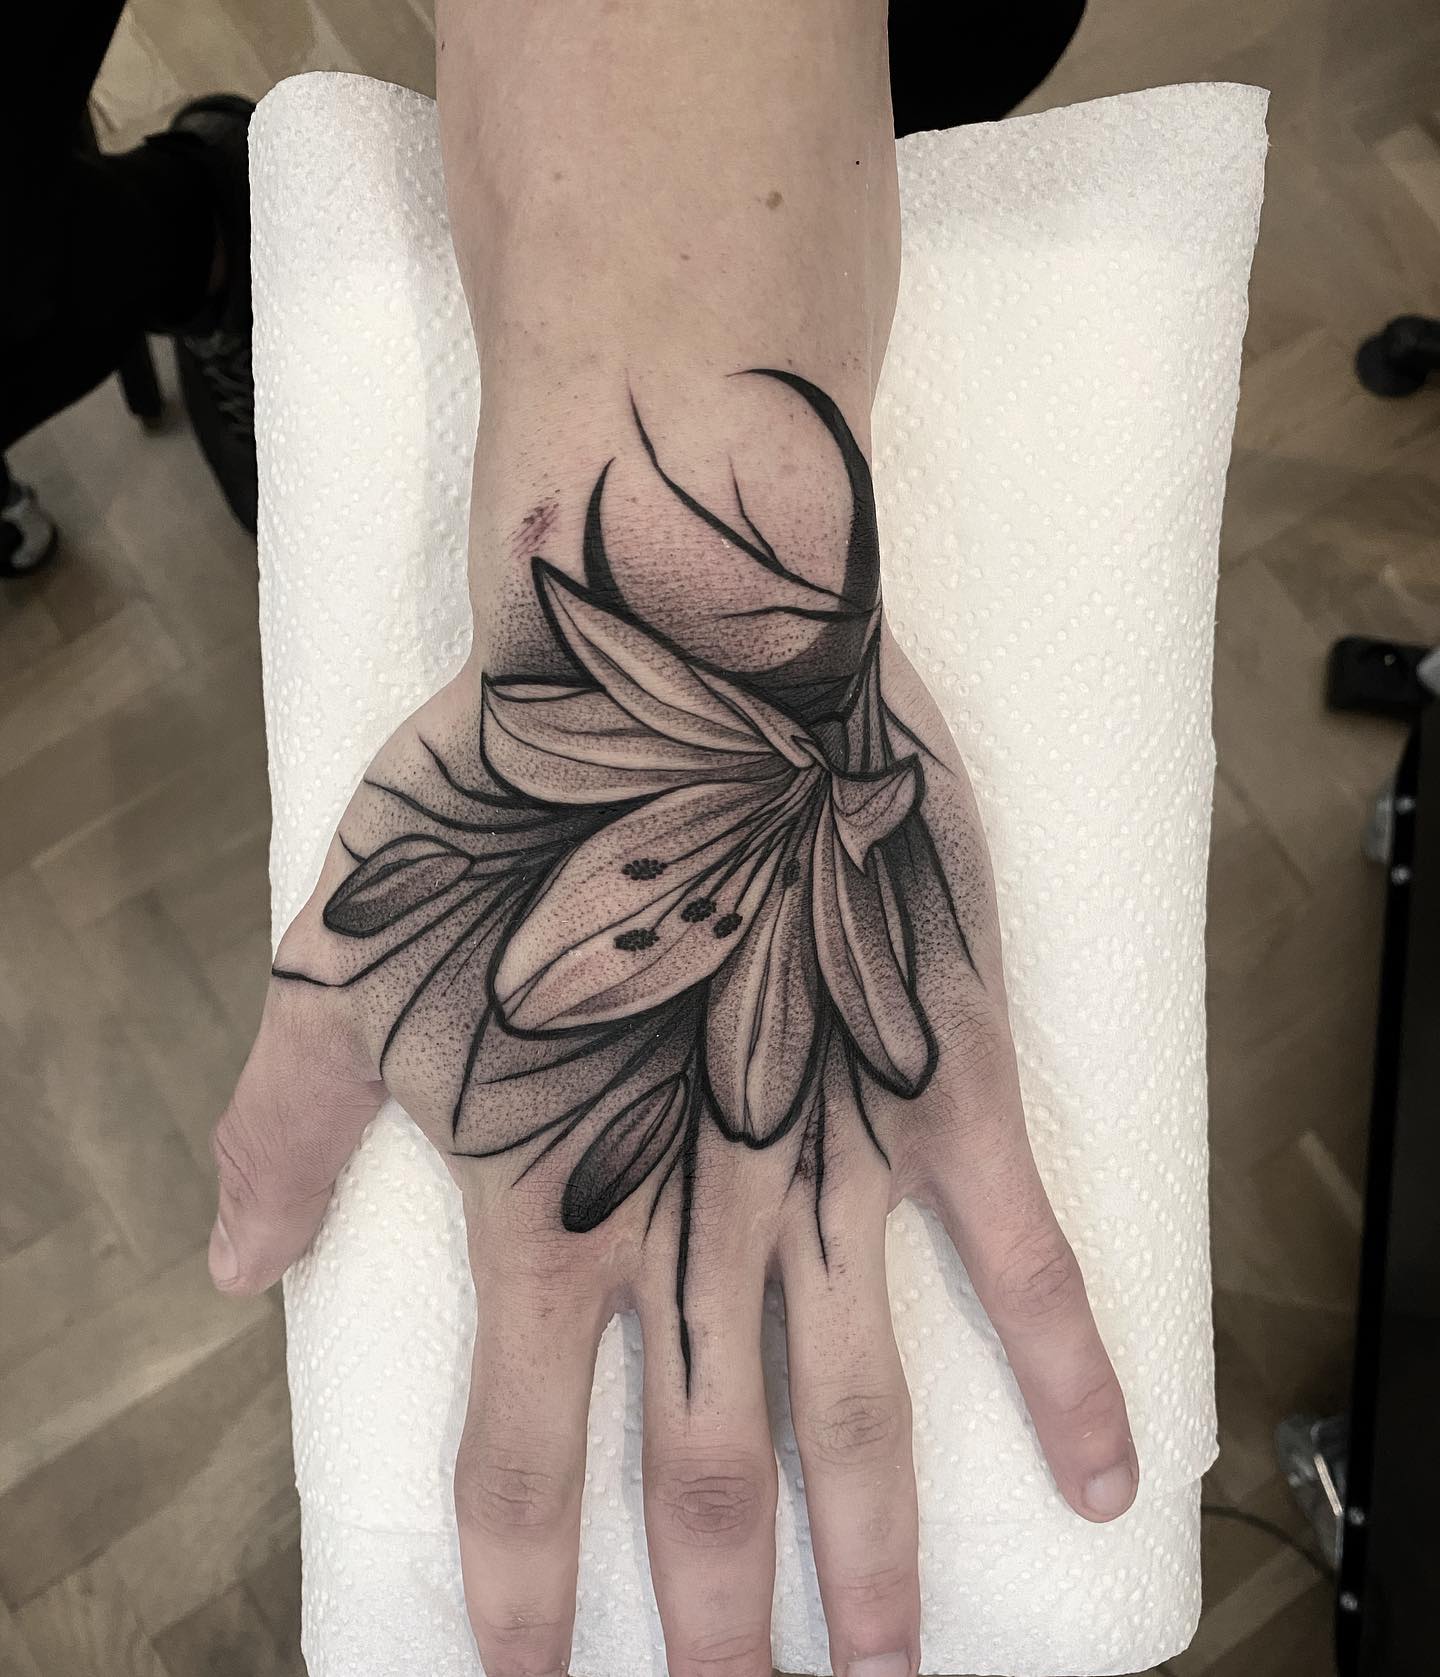 Dotwork lily tattoo on hand is a very unique design. It has small dots that are connected together to form the petals of a flower. If you are brave to cover your hand with a lily, go for it.